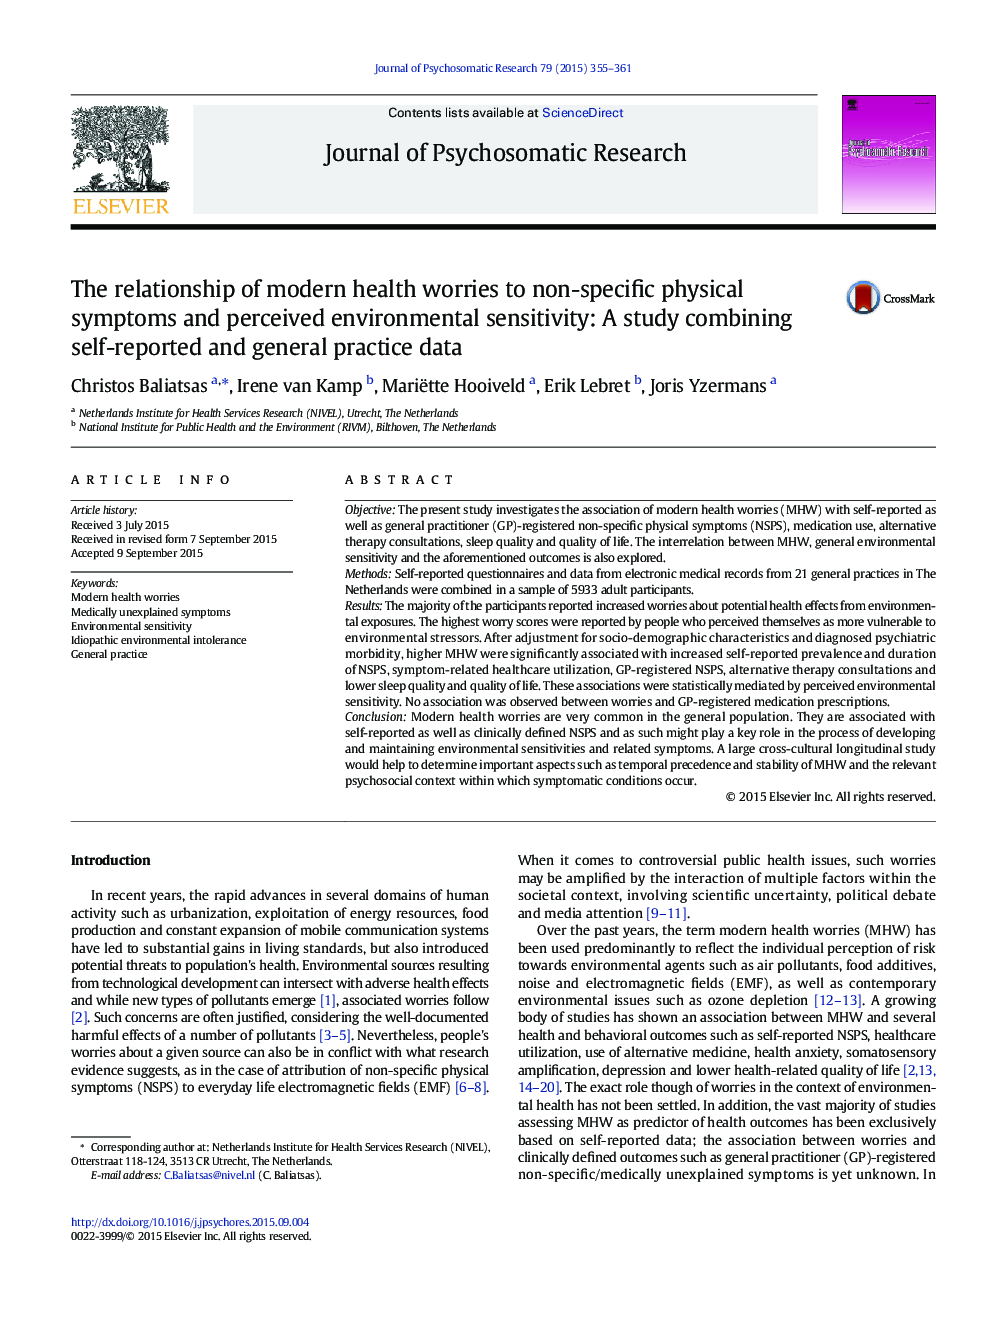 The relationship of modern health worries to non-specific physical symptoms and perceived environmental sensitivity: A study combining self-reported and general practice data